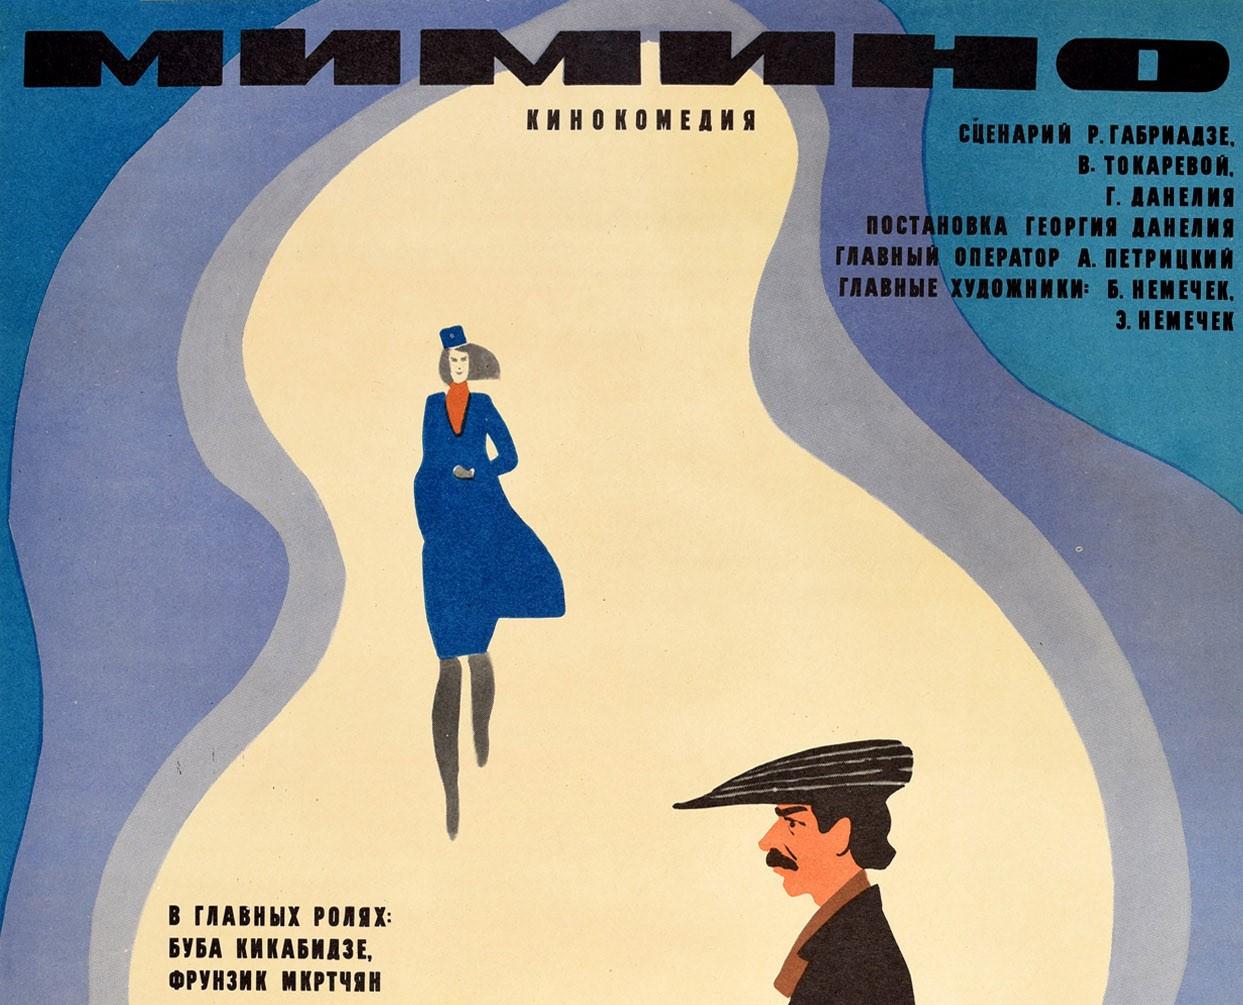 Original vintage Soviet movie poster for a classic award winning comedy film that won the 1977 Golden Prize at the 10th Moscow International Film Festival - Mimino - directed by Georgiy Daneliya with director of photography Anatoliy Petritskiy,